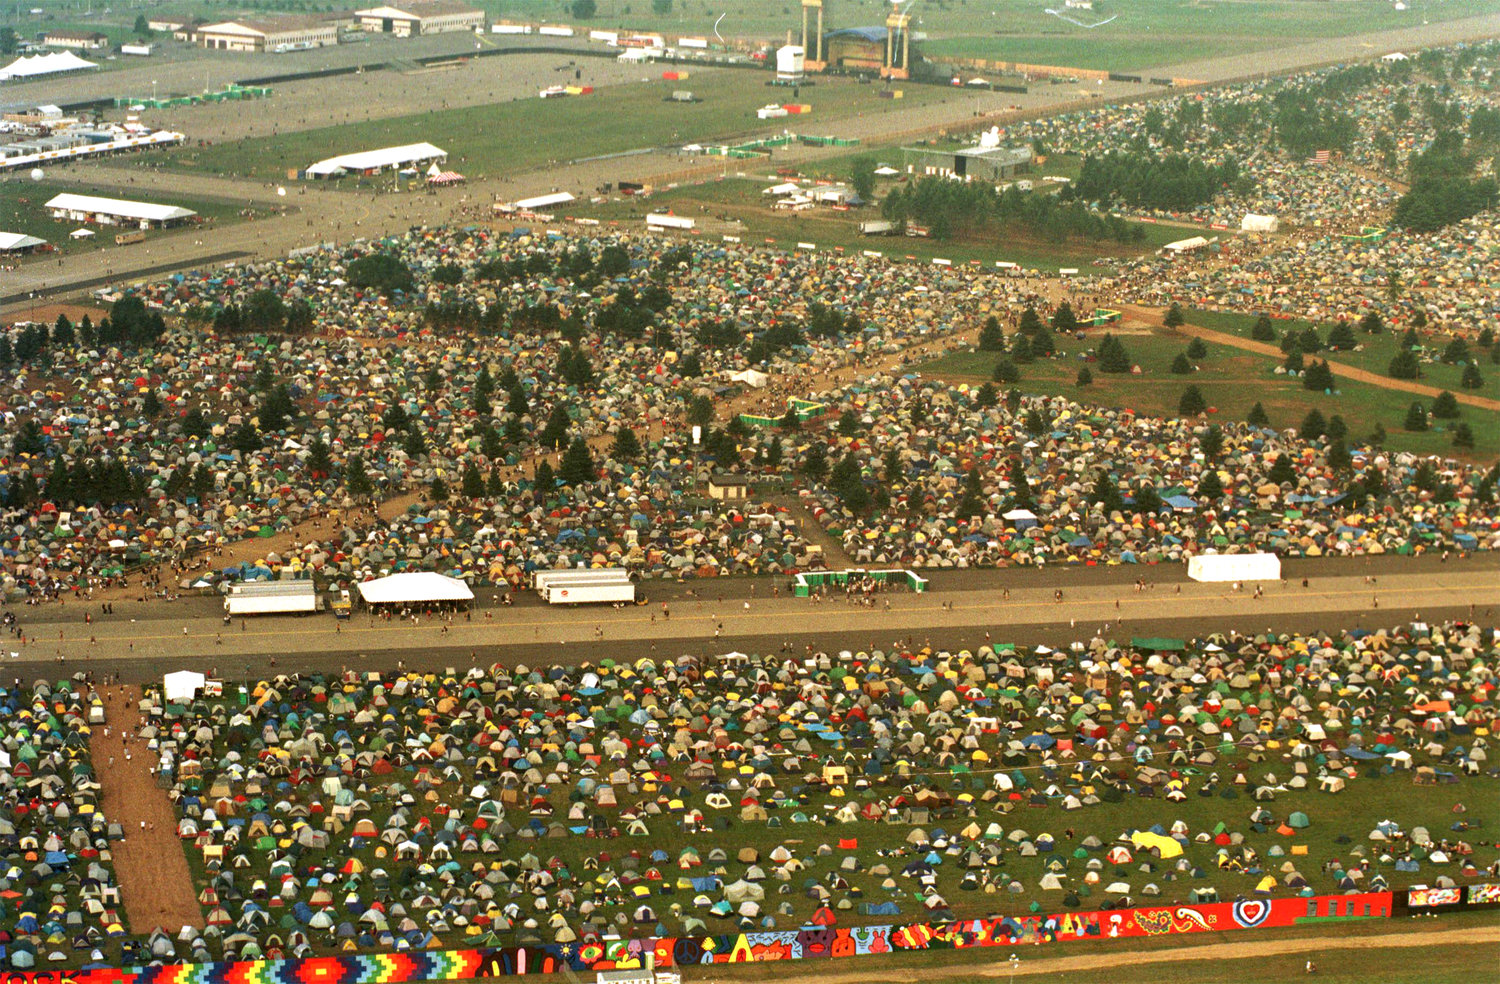 Arerial of Woodstock '99 campgrounds and the West Stage at the top of the photo.